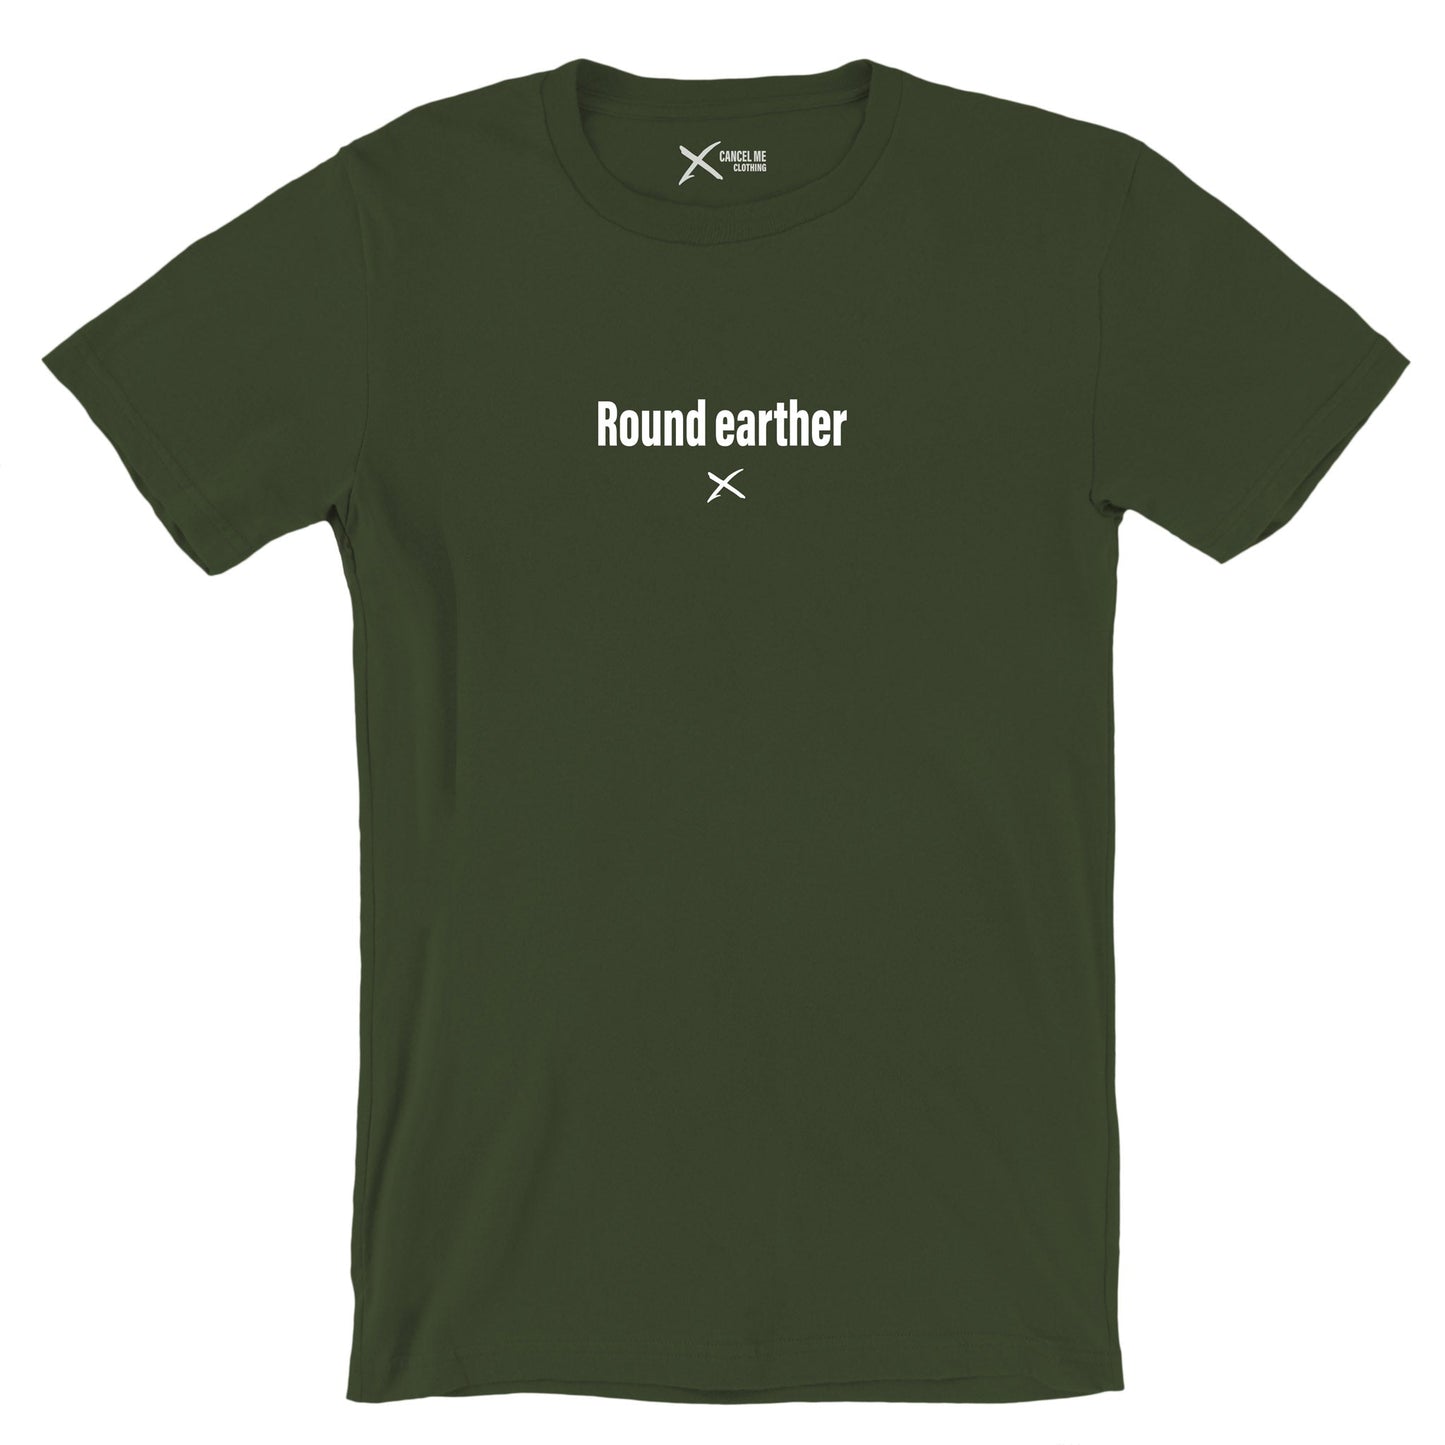 Round earther - Shirt